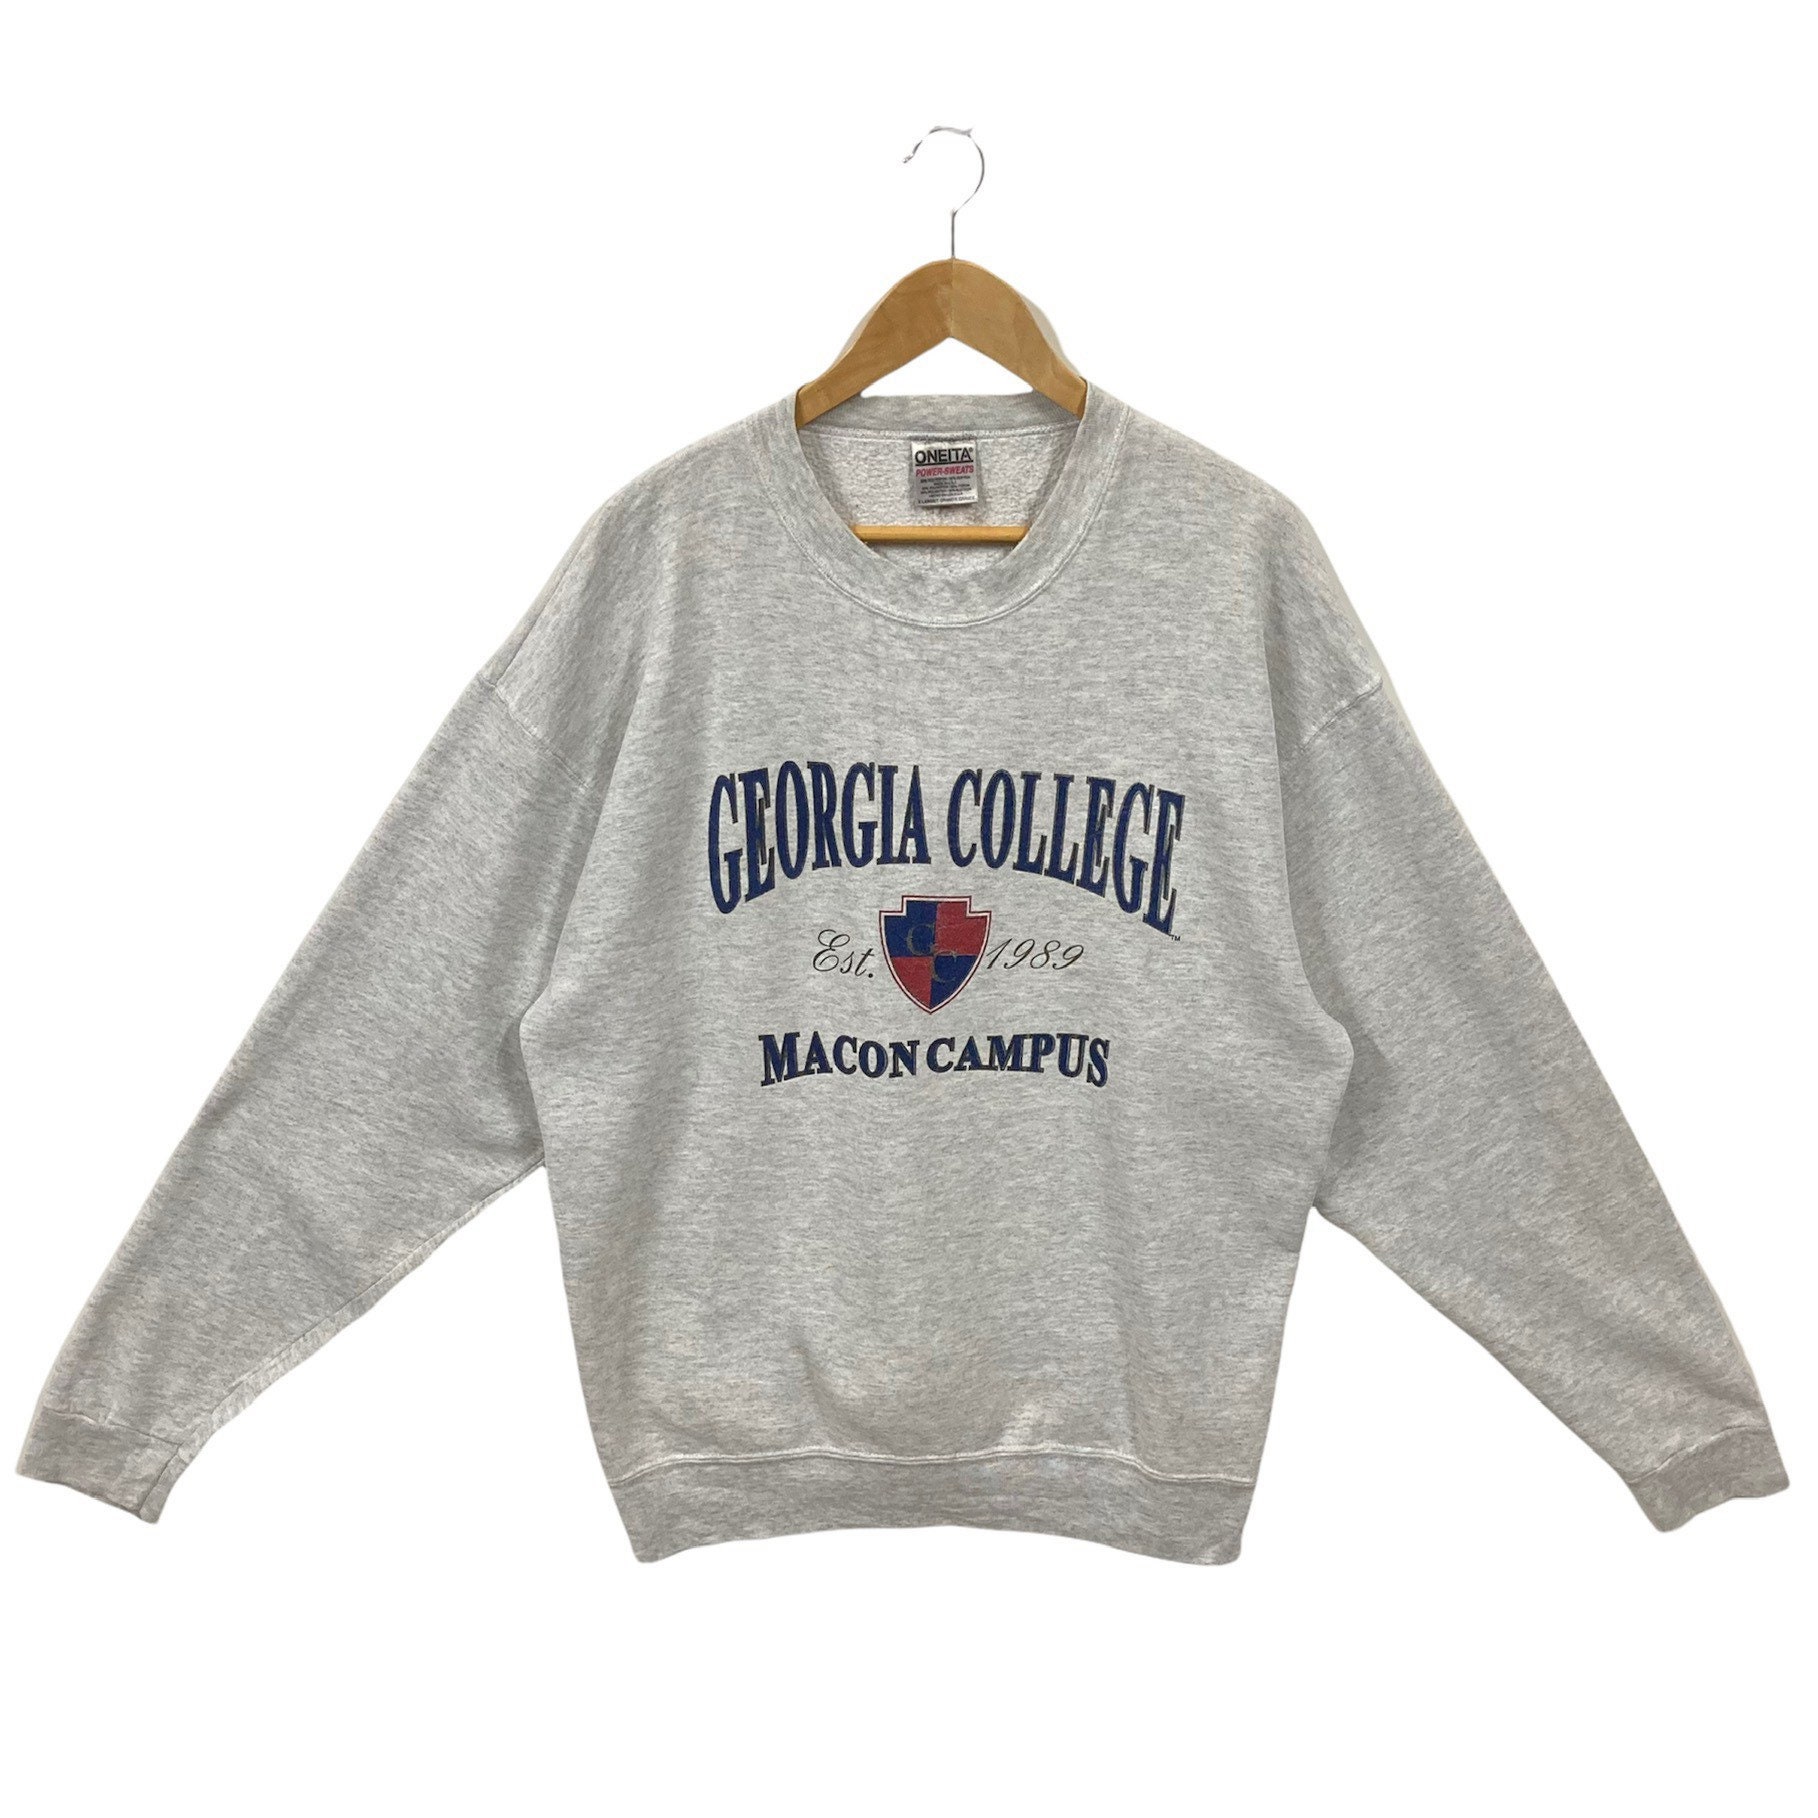 90s College Sweaters - Etsy